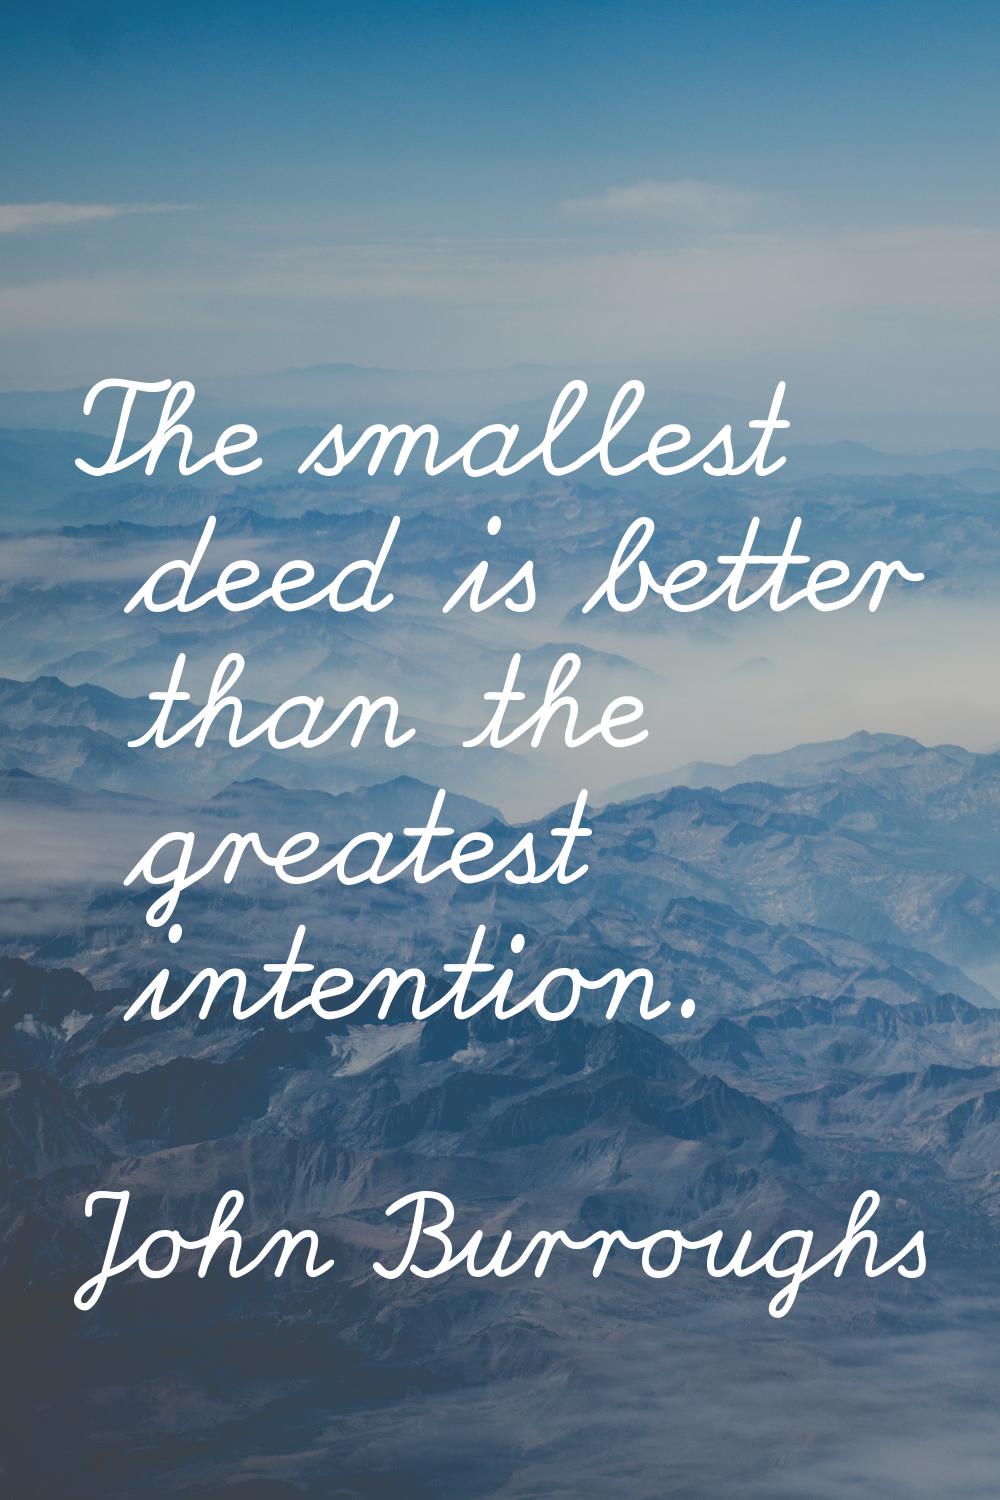 The smallest deed is better than the greatest intention.